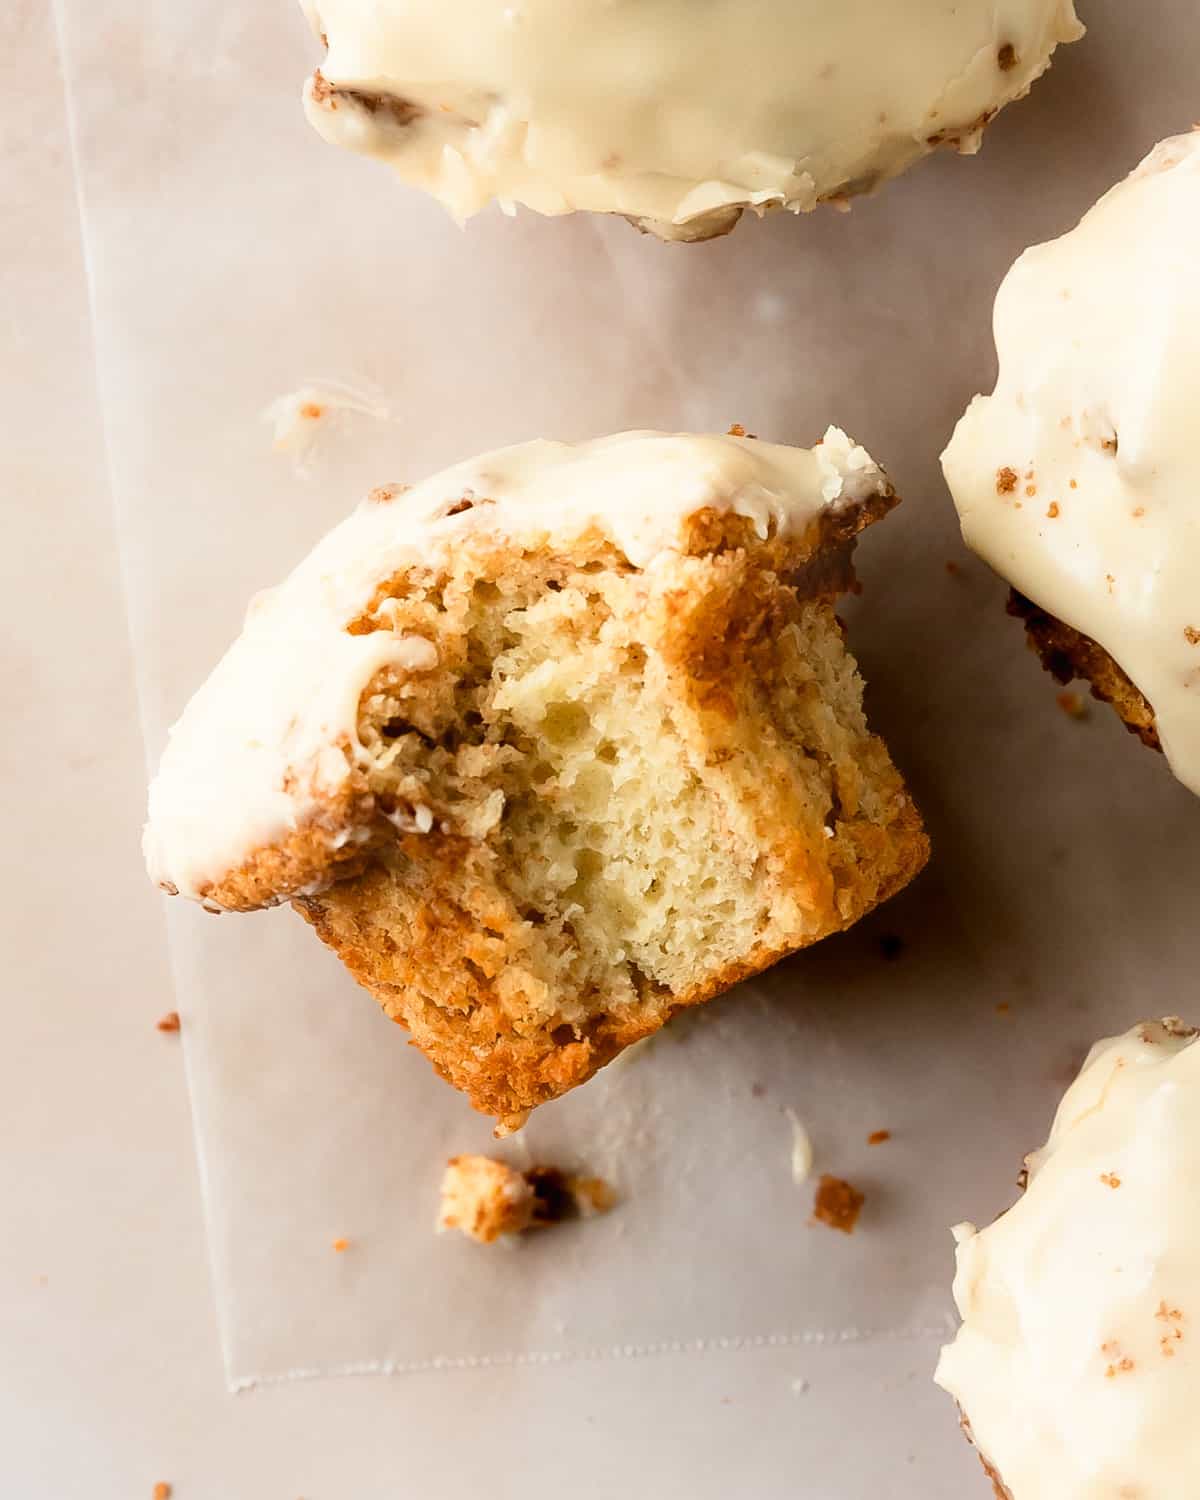 Cinnamon roll muffins are wonderfully soft, light and fluffy no yeast muffins filled with ribbons of sweet cinnamon roll filling.  Once baked, these cute cinnamon rolls muffins are topped with a sweet and tangy cream cheese glaze. These cinnamon bun muffins are quick, easy to make and muffins are perfect for breakfasts or snacks.